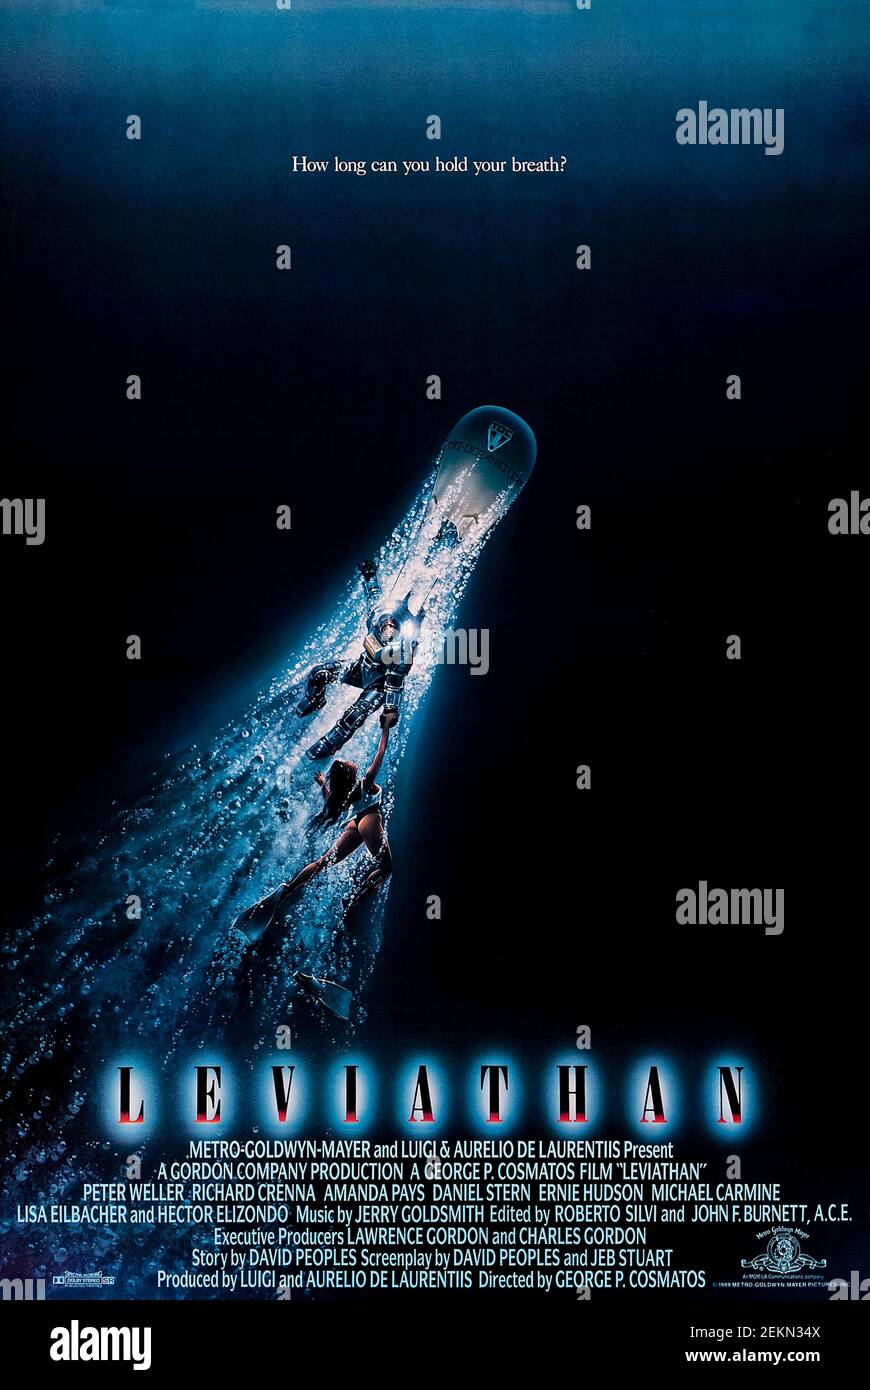 Leviathan (1989) directed by George P. Cosmatos and starring Peter Weller, Richard Crenna and Amanda Pays. An undersea miining operation encounters a Soviet wreck and discovers dangerous lifeform. Stock Photo